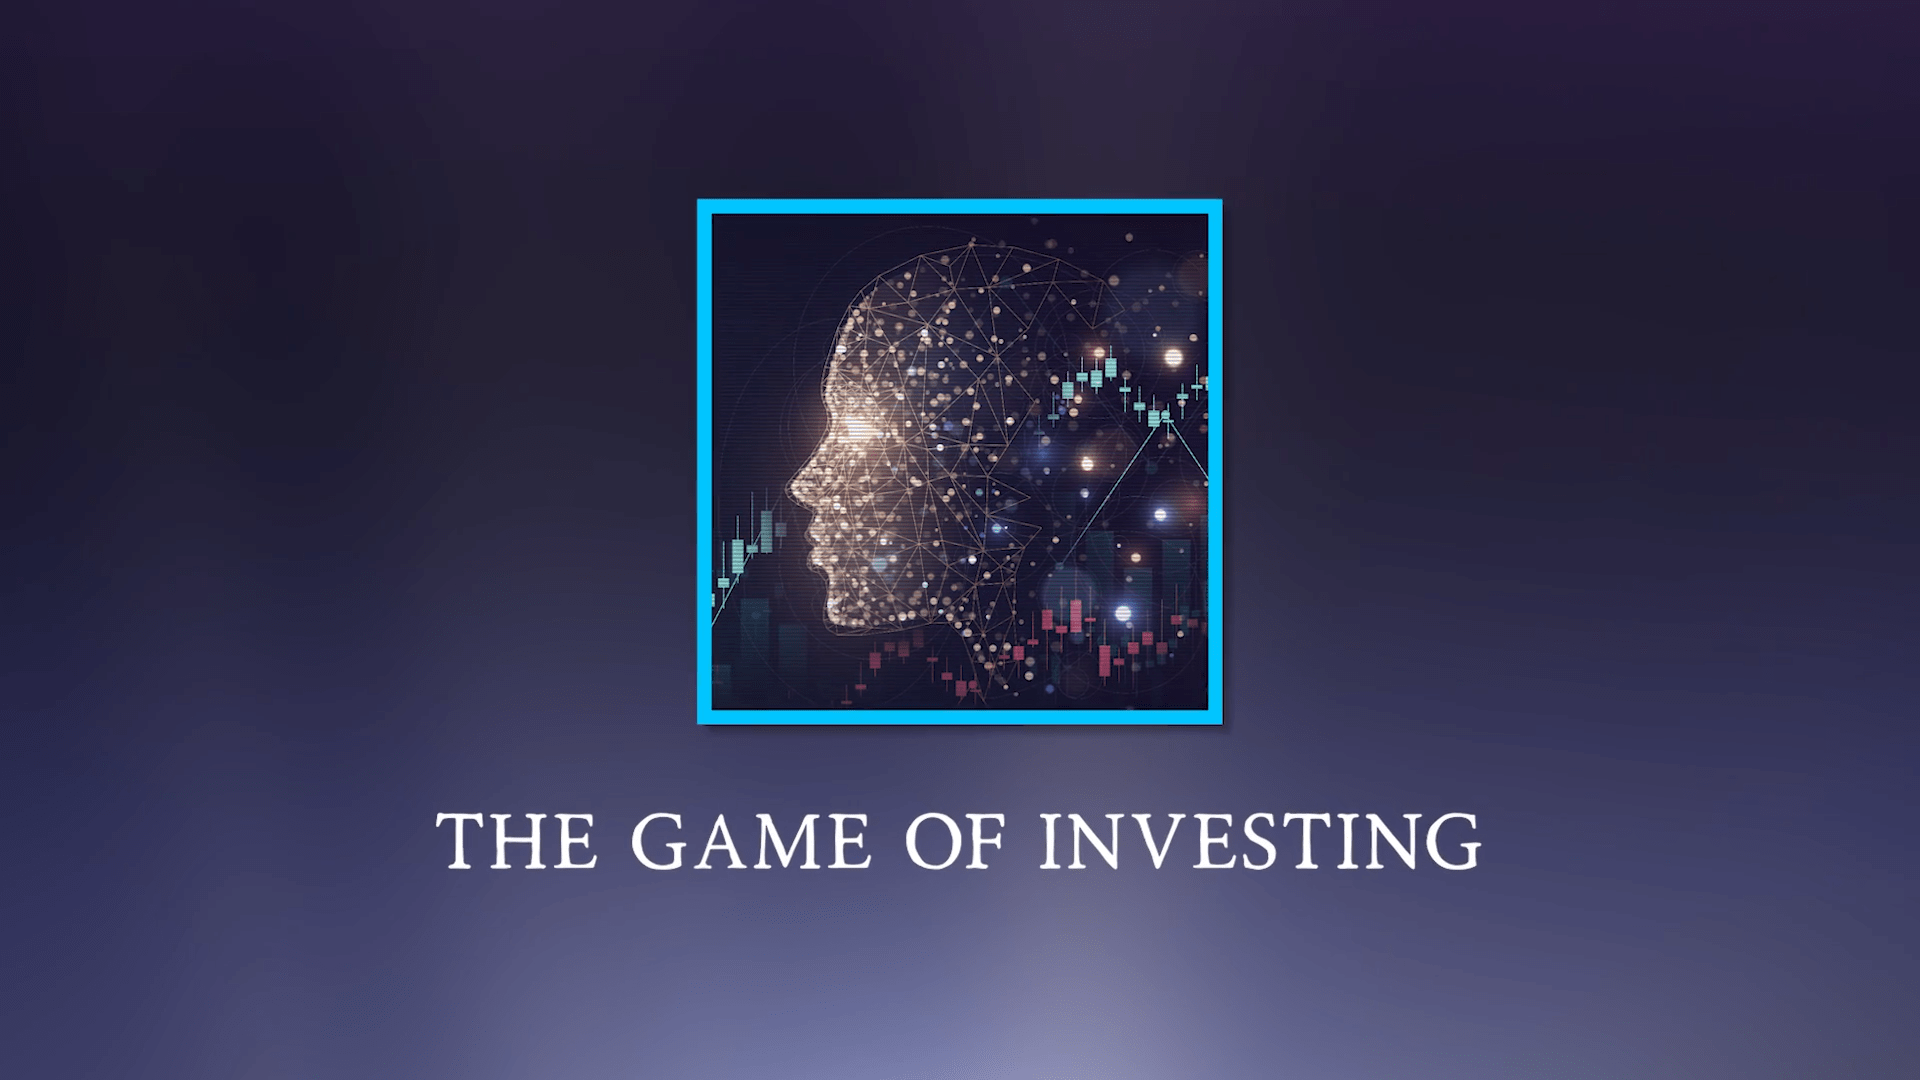 The Game of Investing